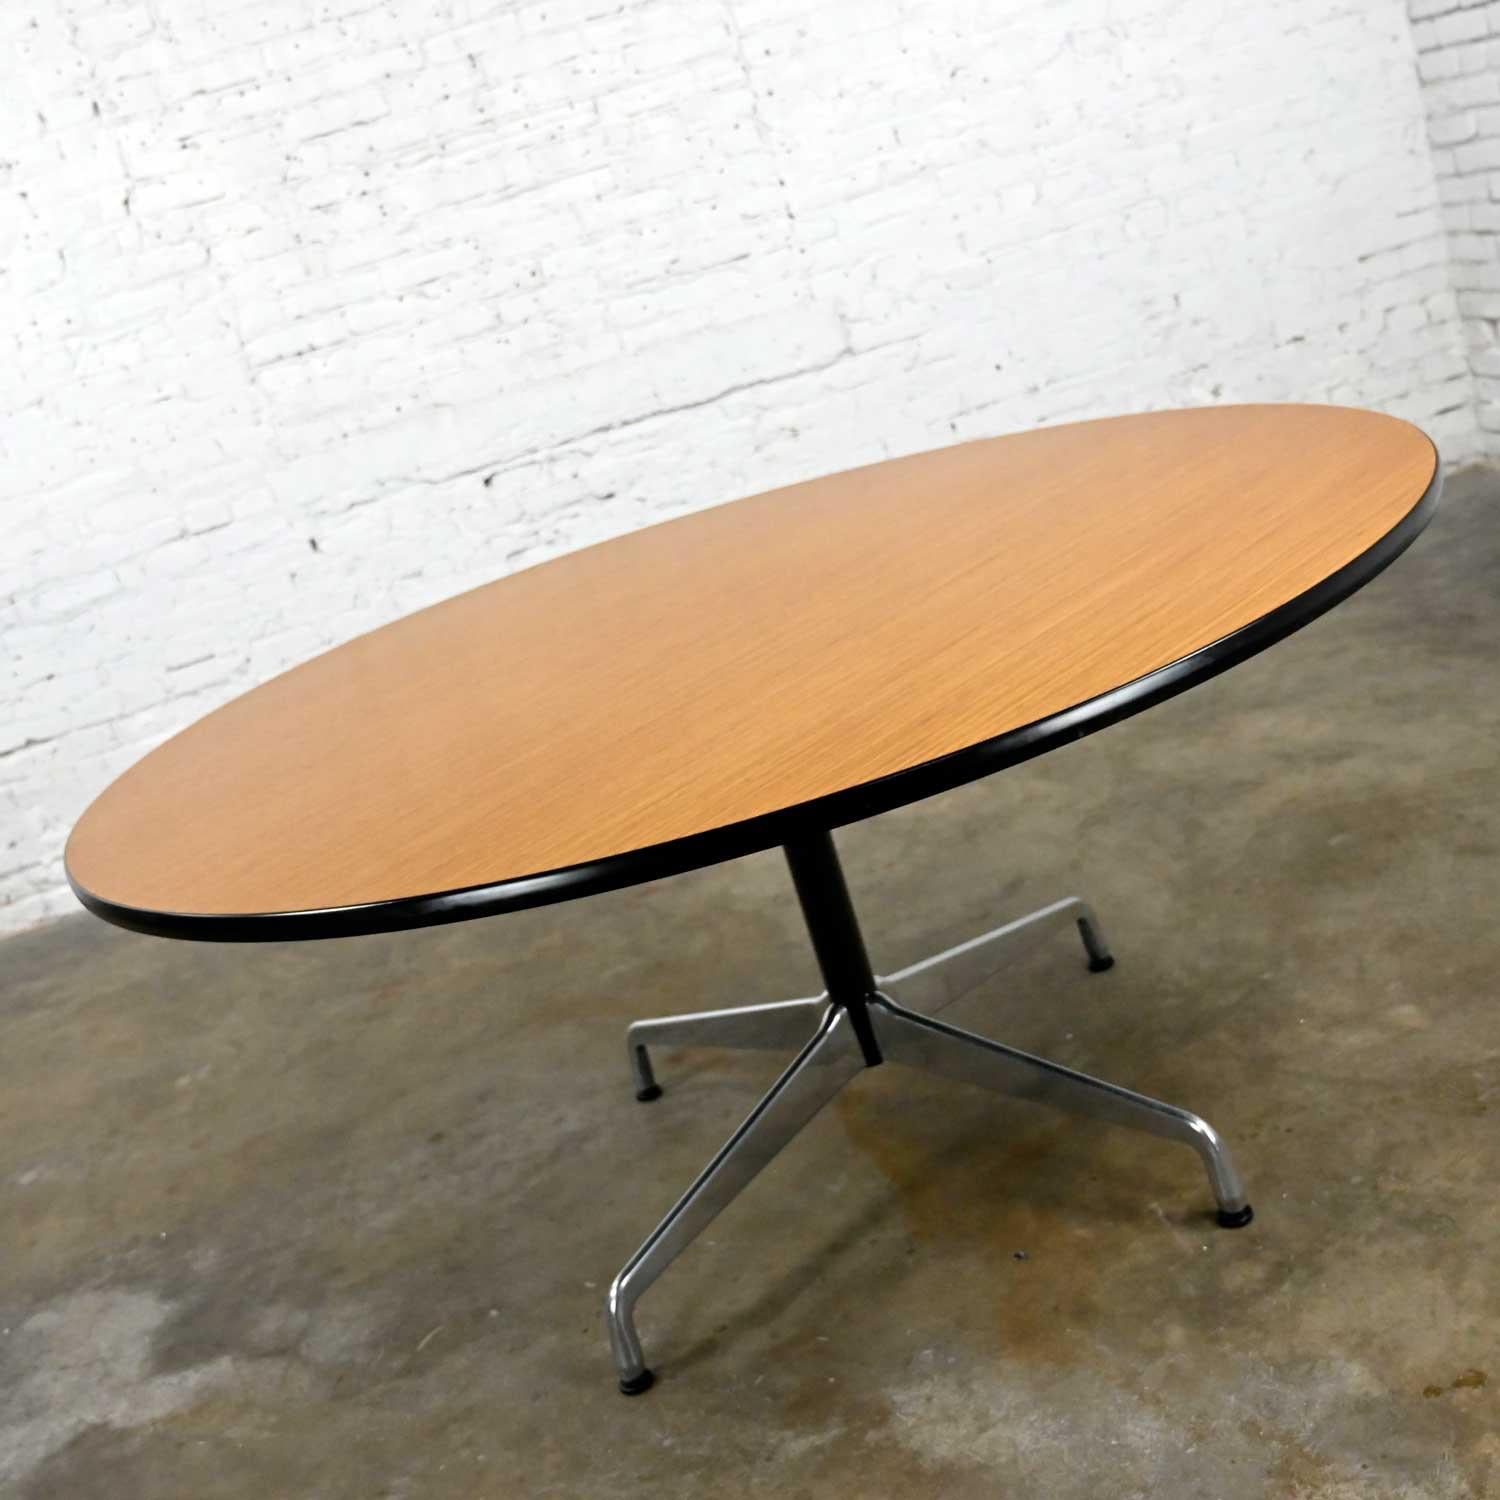 Wonderful vintage Mid-Century Modern Eames for Herman Miller table comprised of light natural oak wood veneer round tops, black shaft, aluminum universal base, and aluminum spider attachment. Beautiful condition, keeping in mind that these are